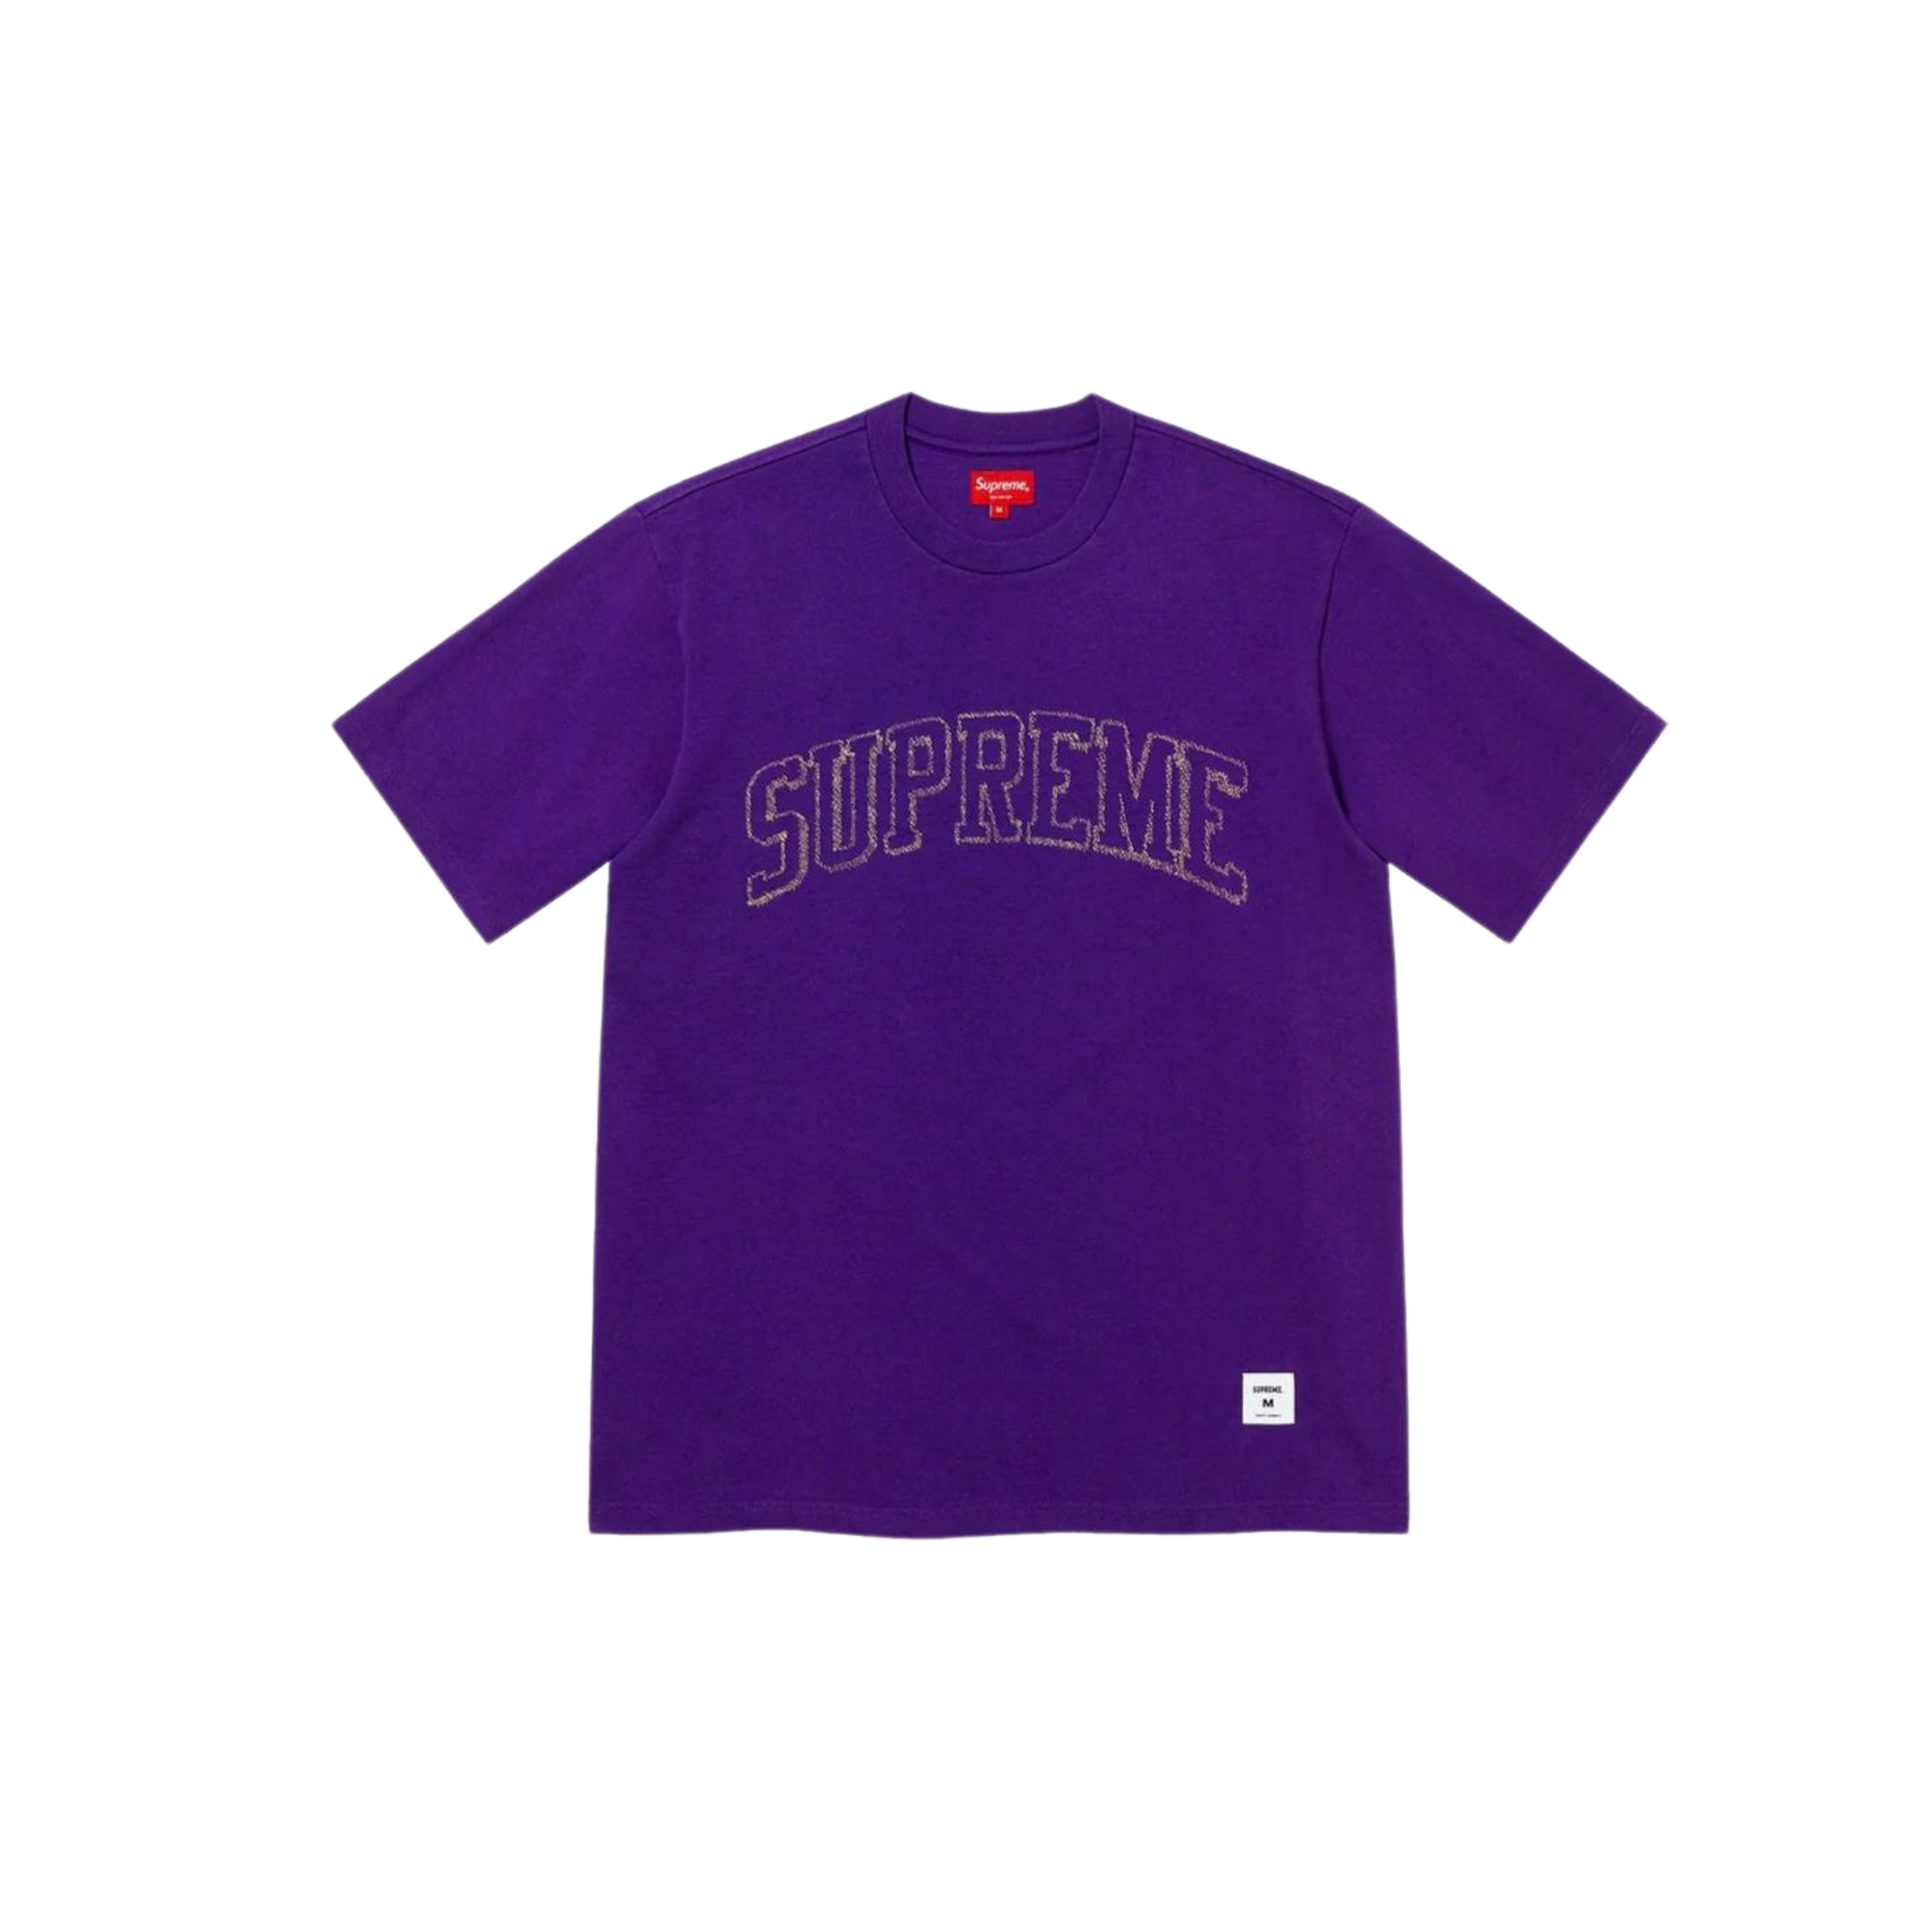 Sketch Embroidered S/S Top Purple | Supreme | Hype Temple